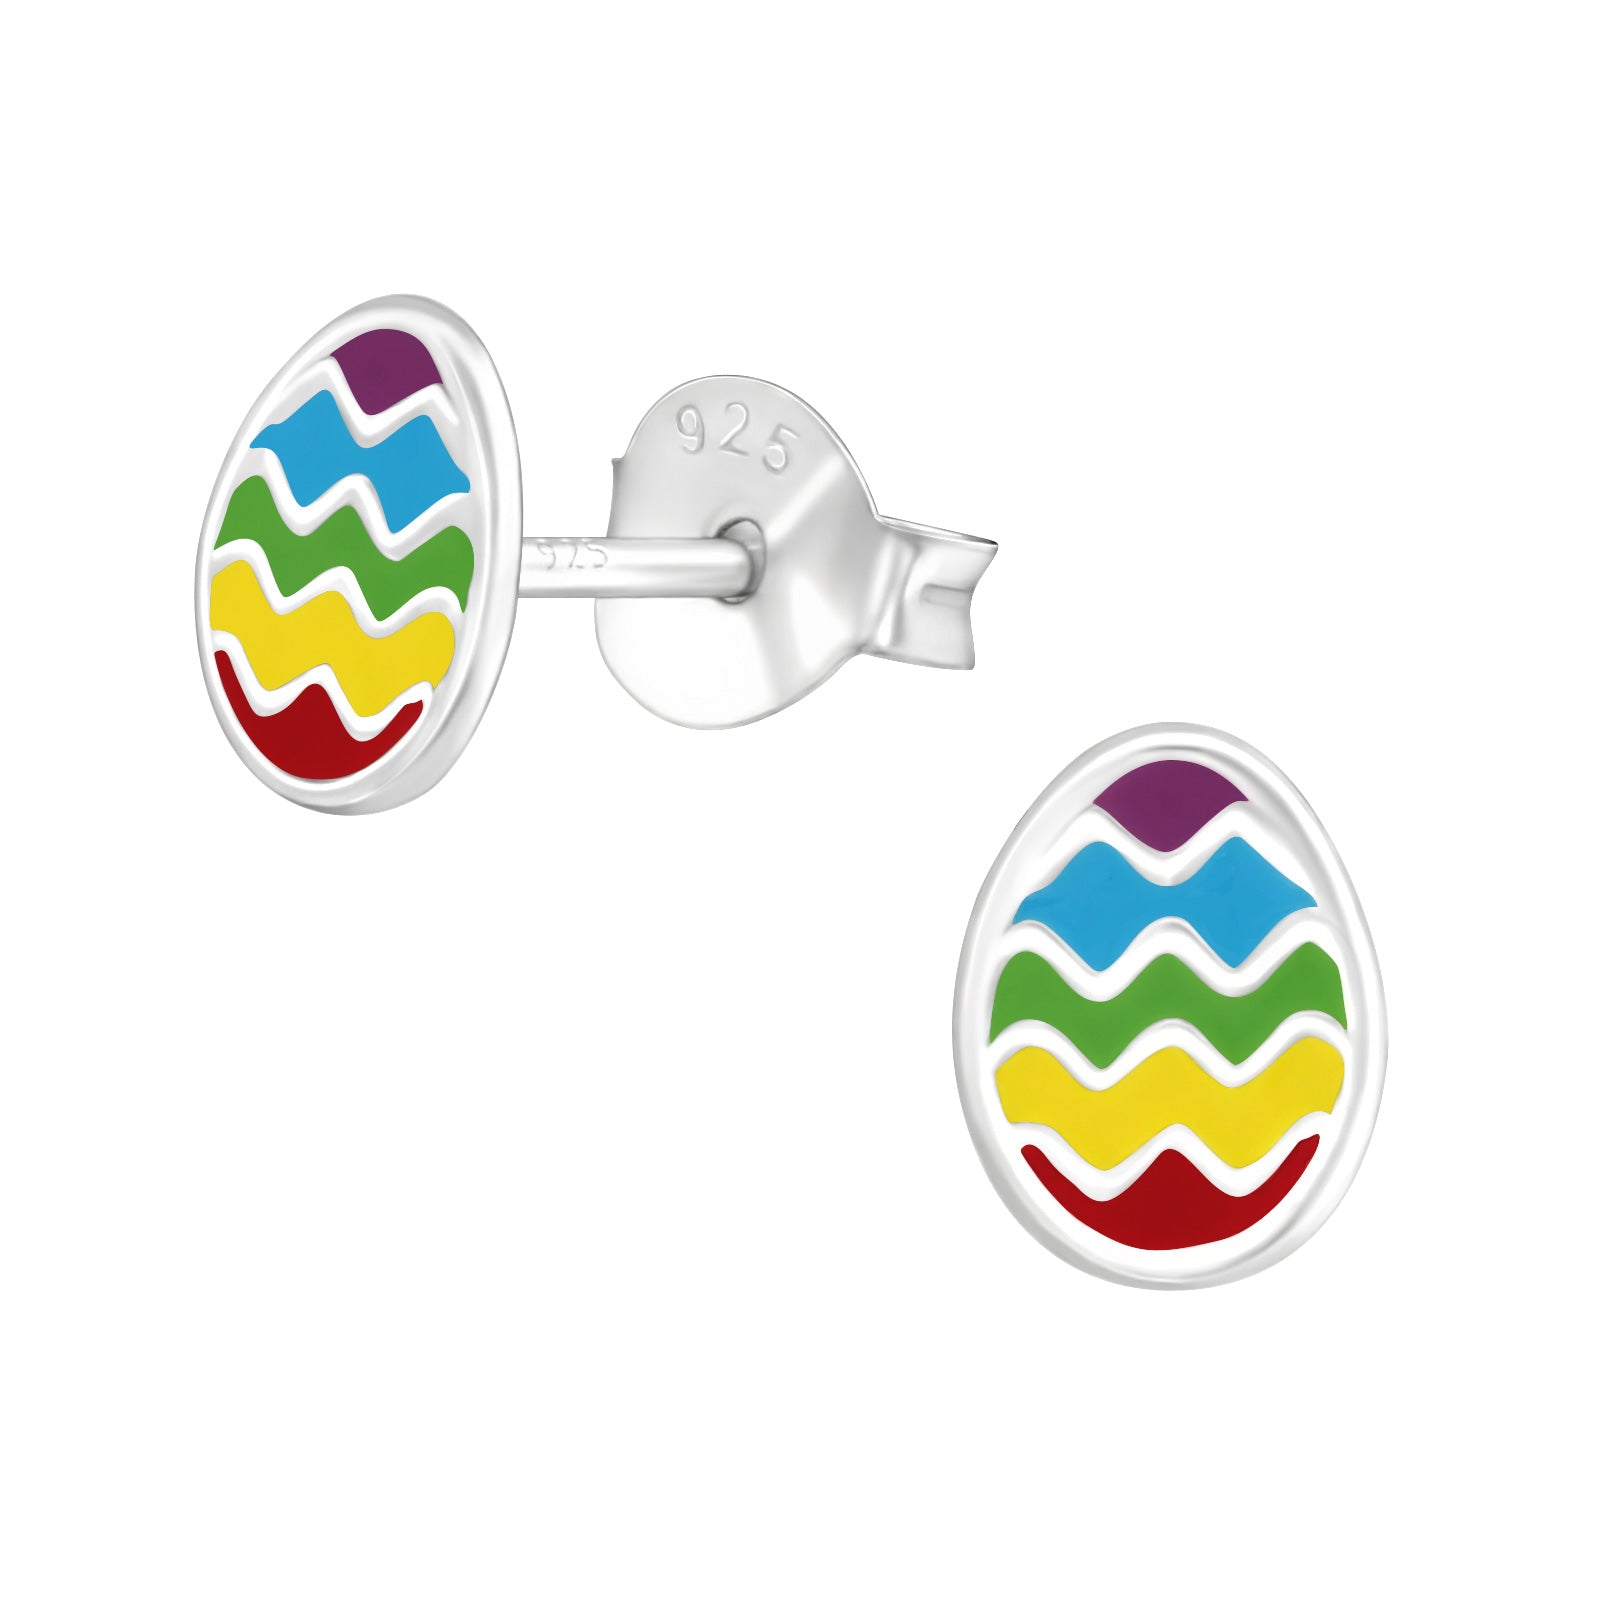 Primary colour easter eggs earrings with zig zag pattern